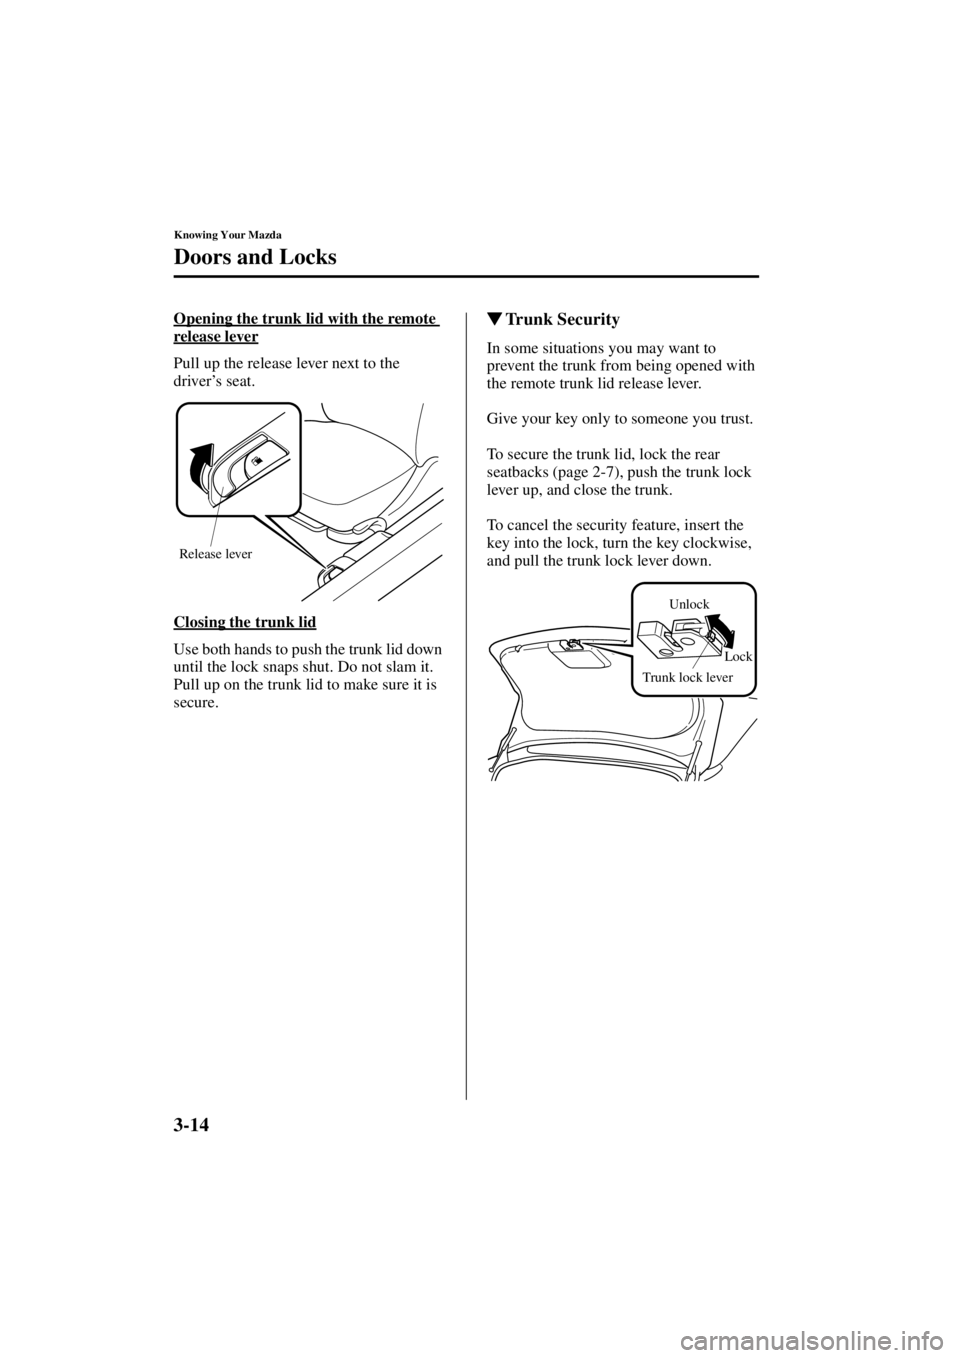 MAZDA MODEL 3 5-DOOR 2004  Owners Manual 3-14
Knowing Your Mazda
Doors and Locks
Form No. 8S18-EA-03I
Opening the trunk lid with the remote 
release lever
Pull up the release lever next to the 
driver’s seat.
Closing the trunk lid
Use both